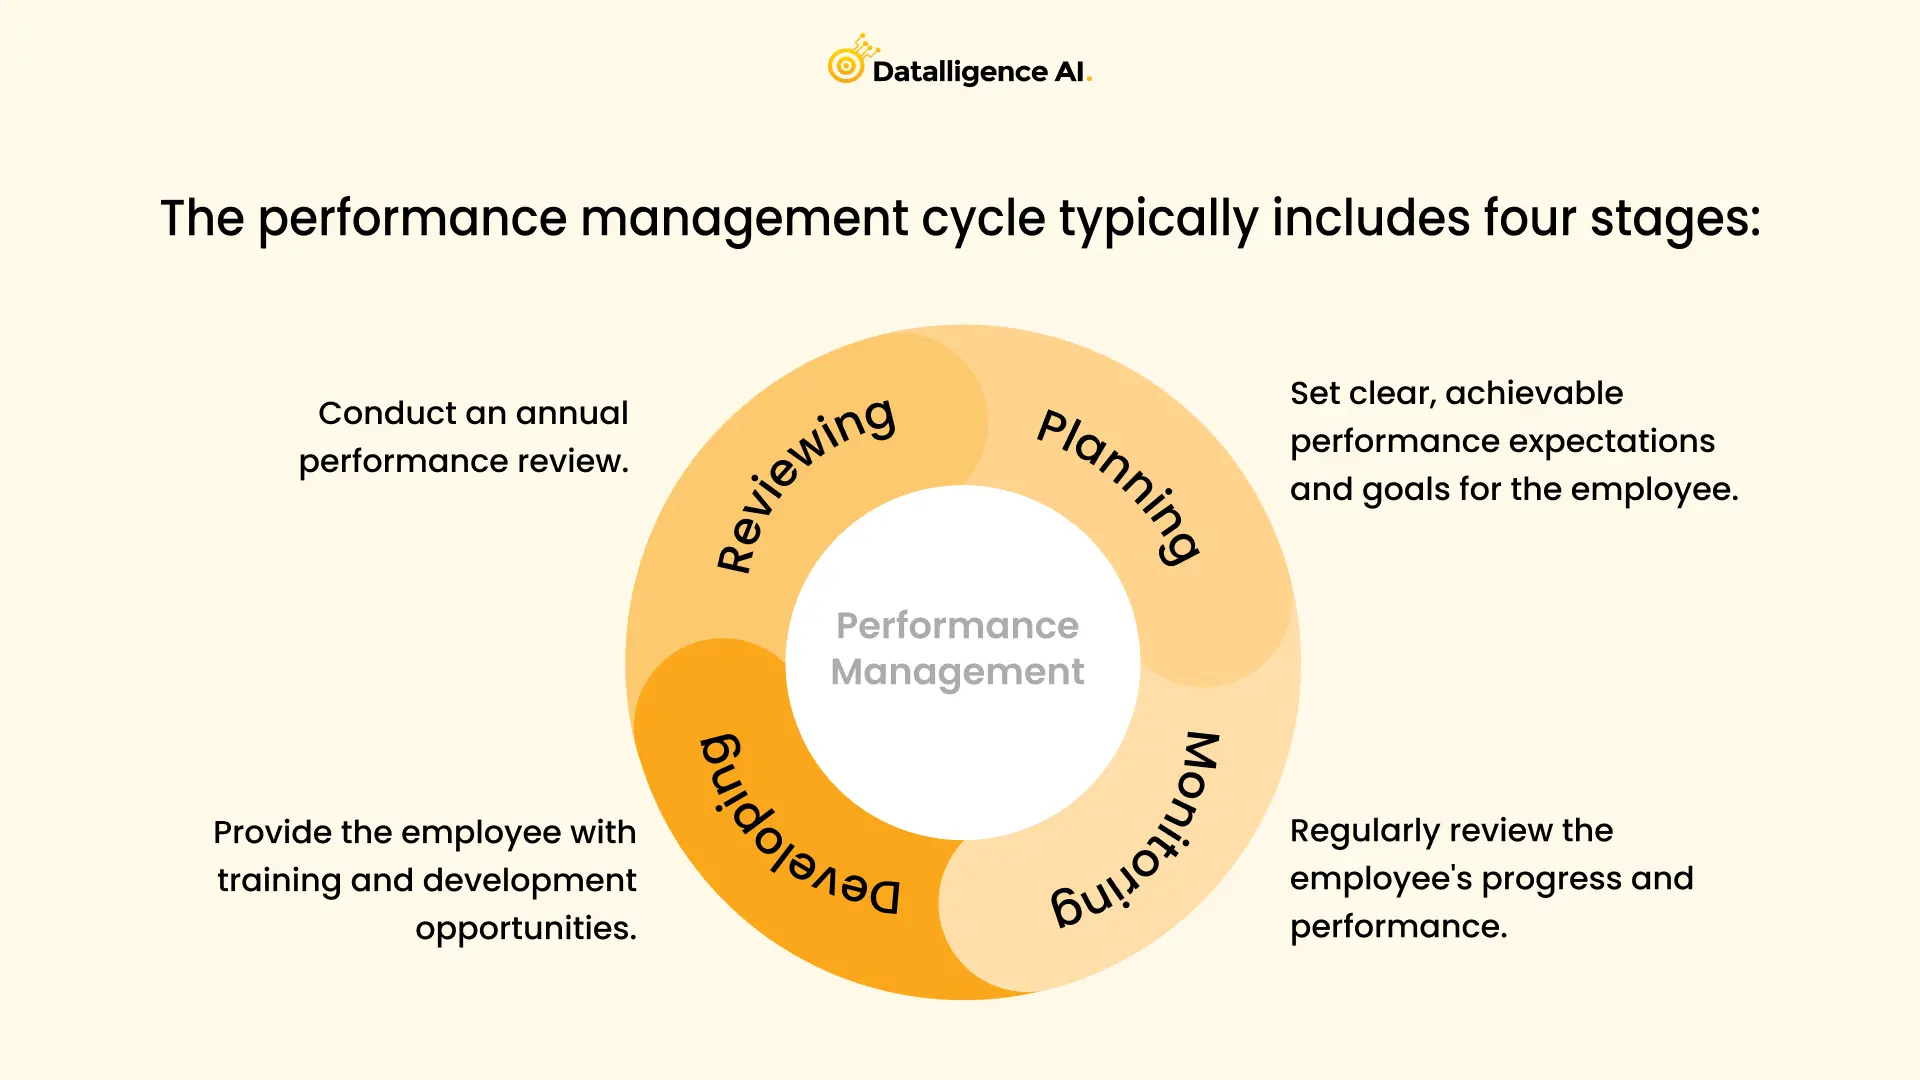 The performance management cycle typically includes four stages